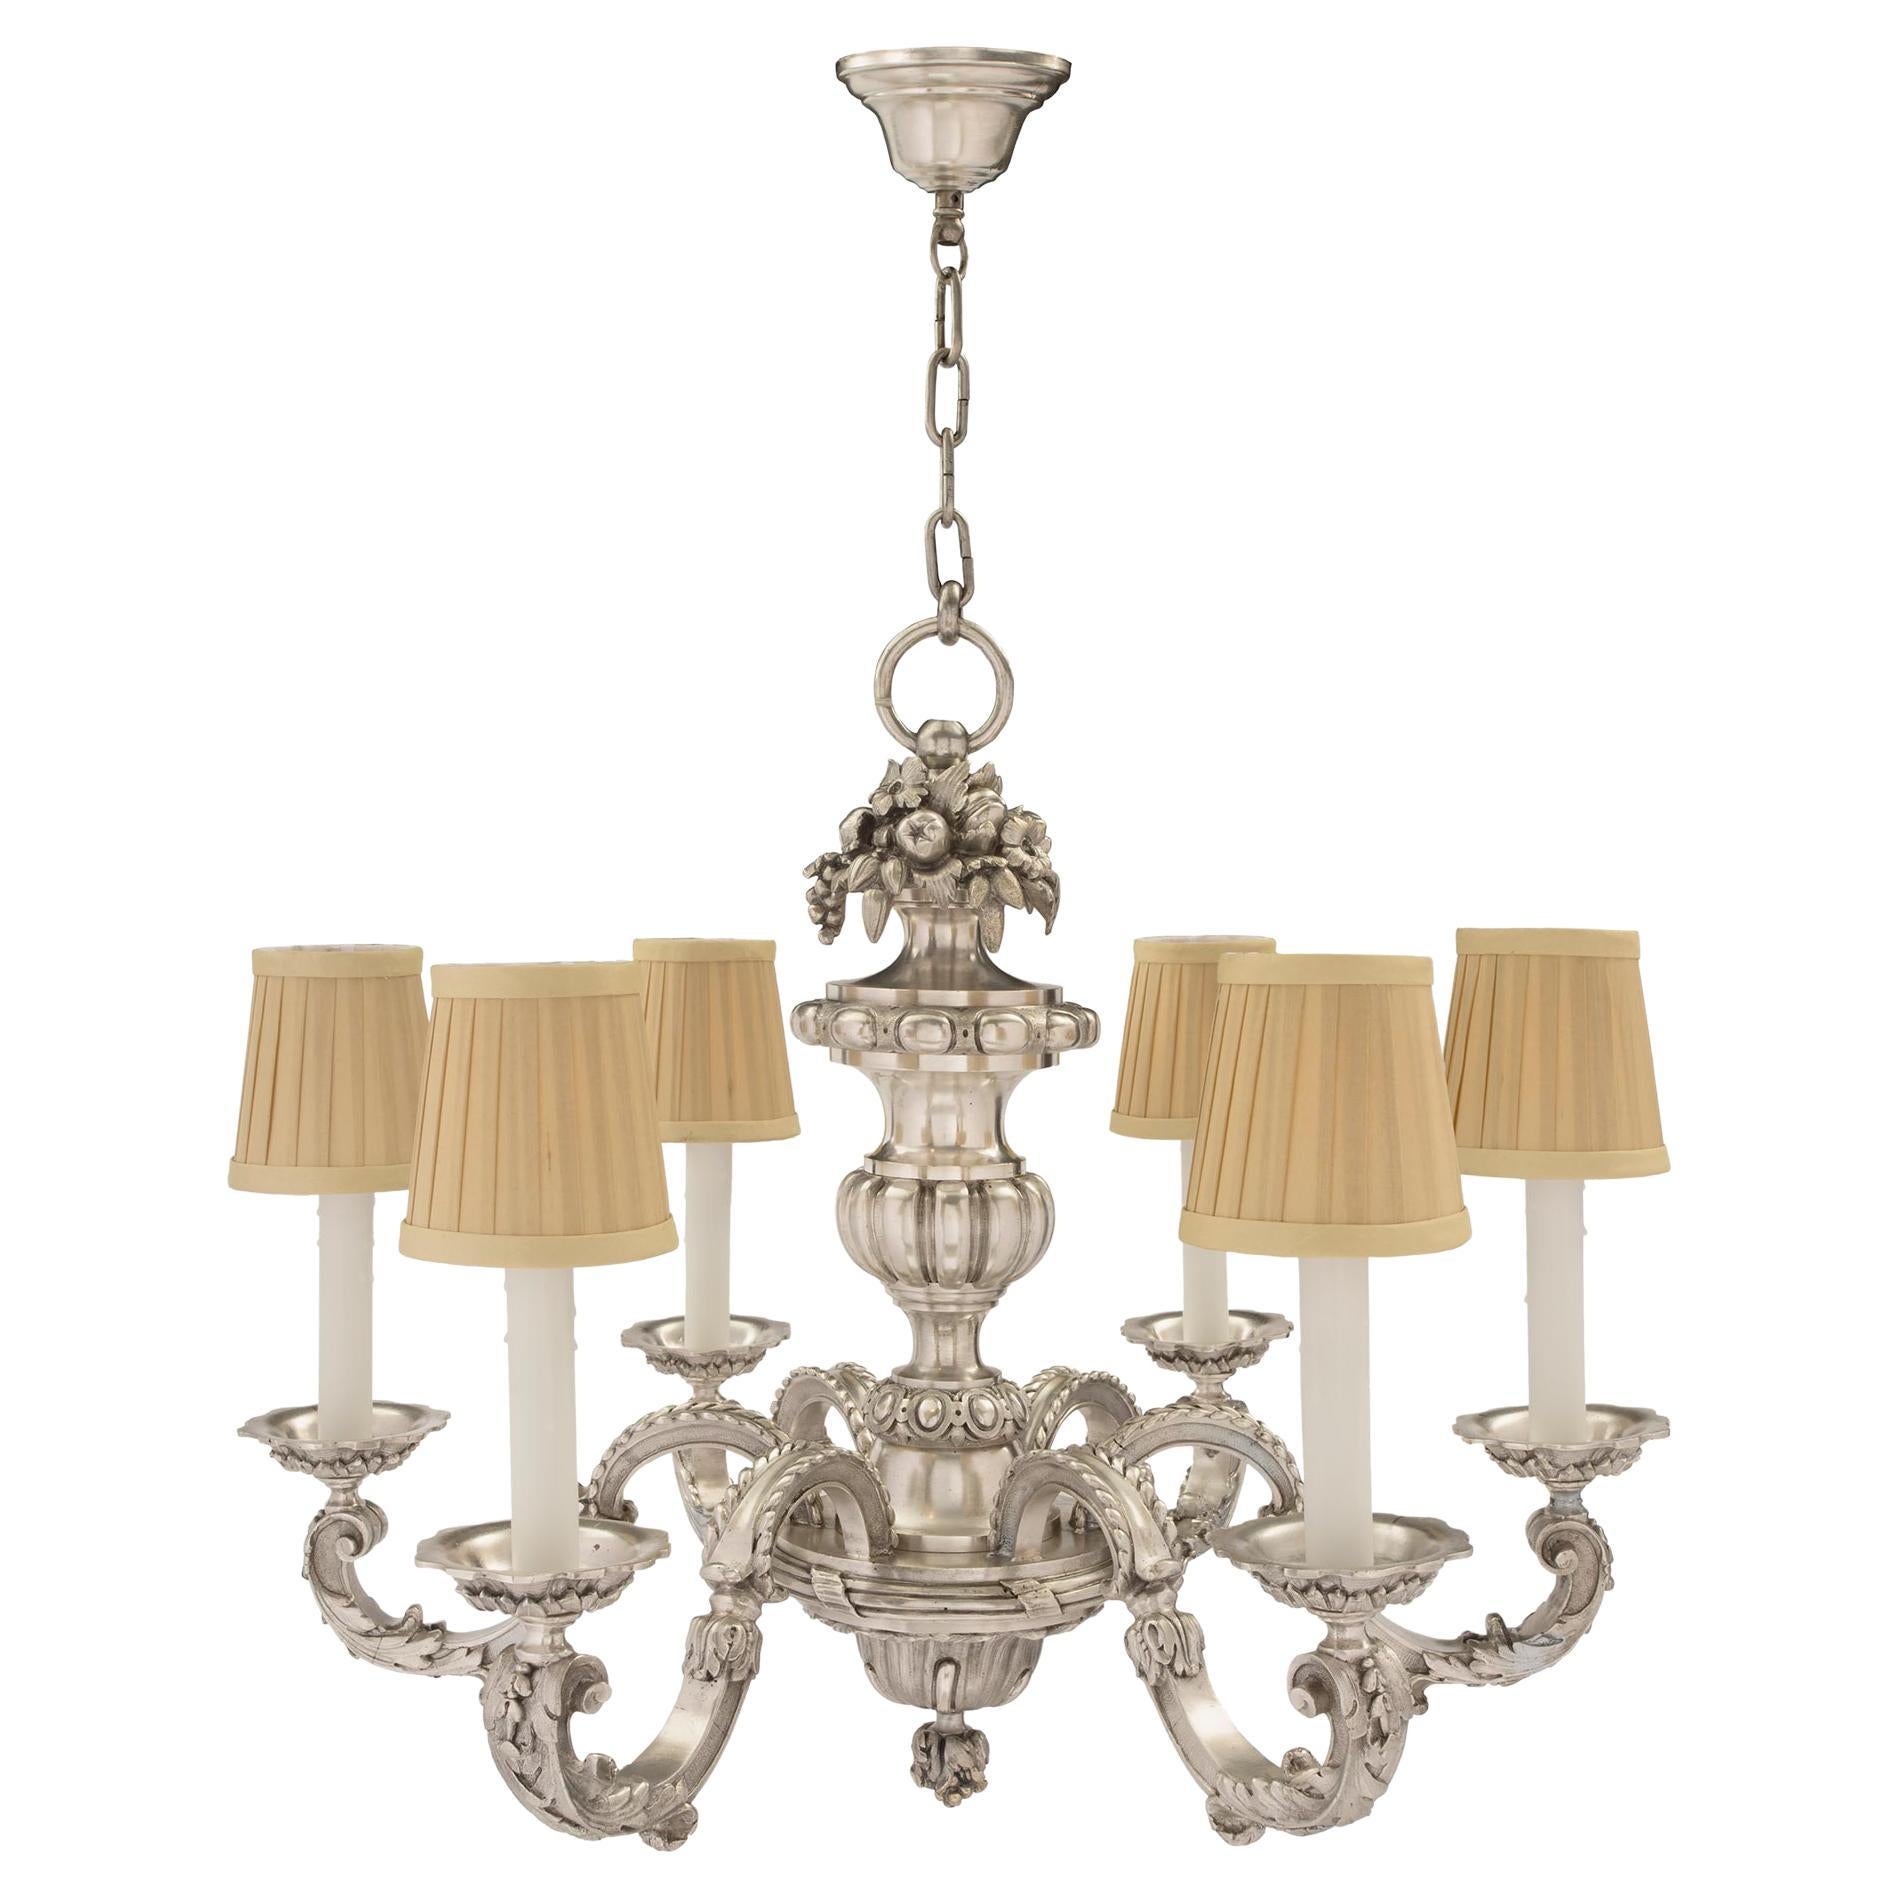 French 19th Century Louis XVI Style Silvered Bronze Six-Arm Chandelier